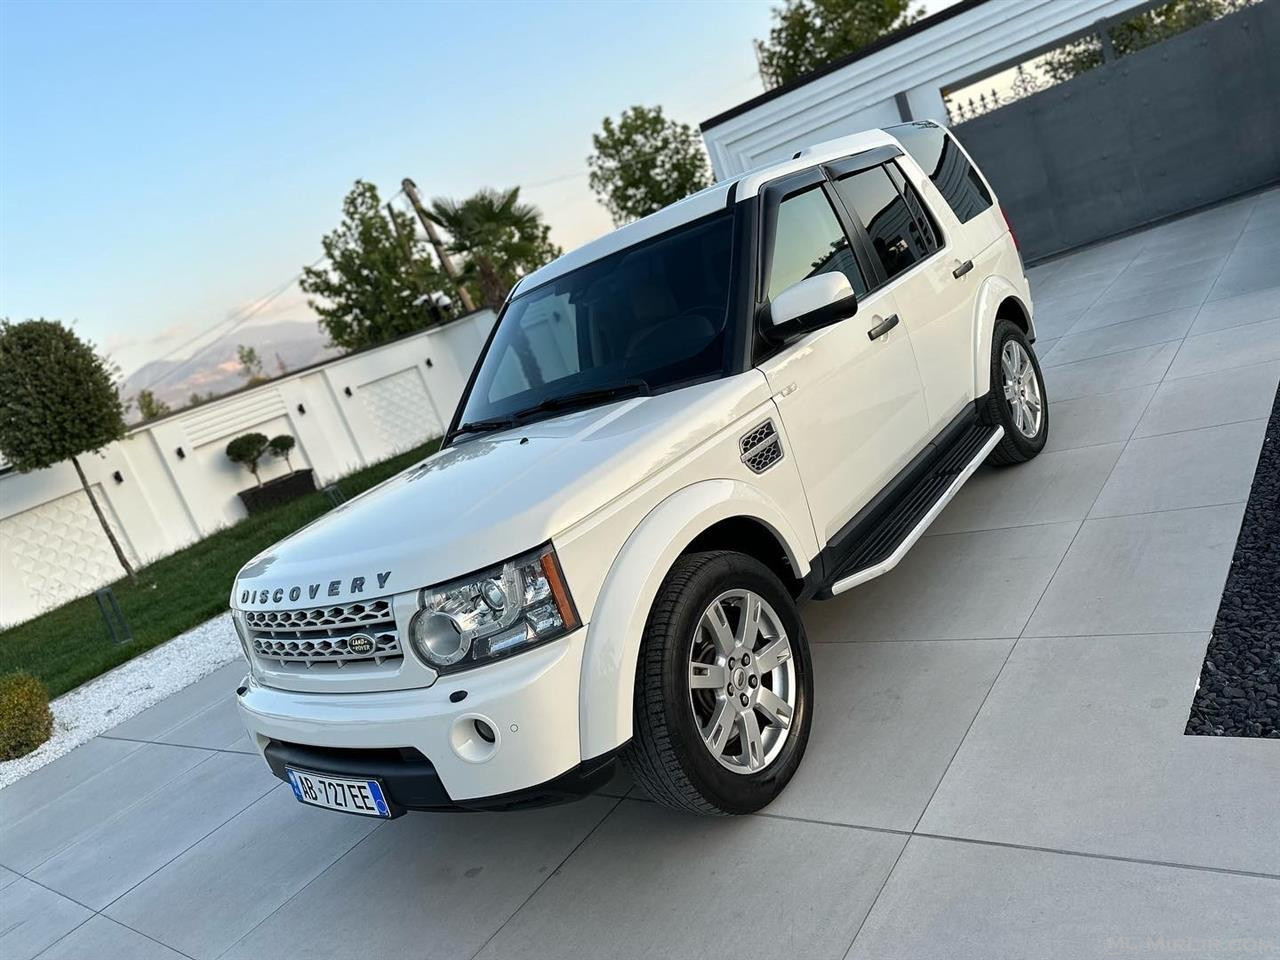 Land Rover Discovery TD4 3.0 nafte 